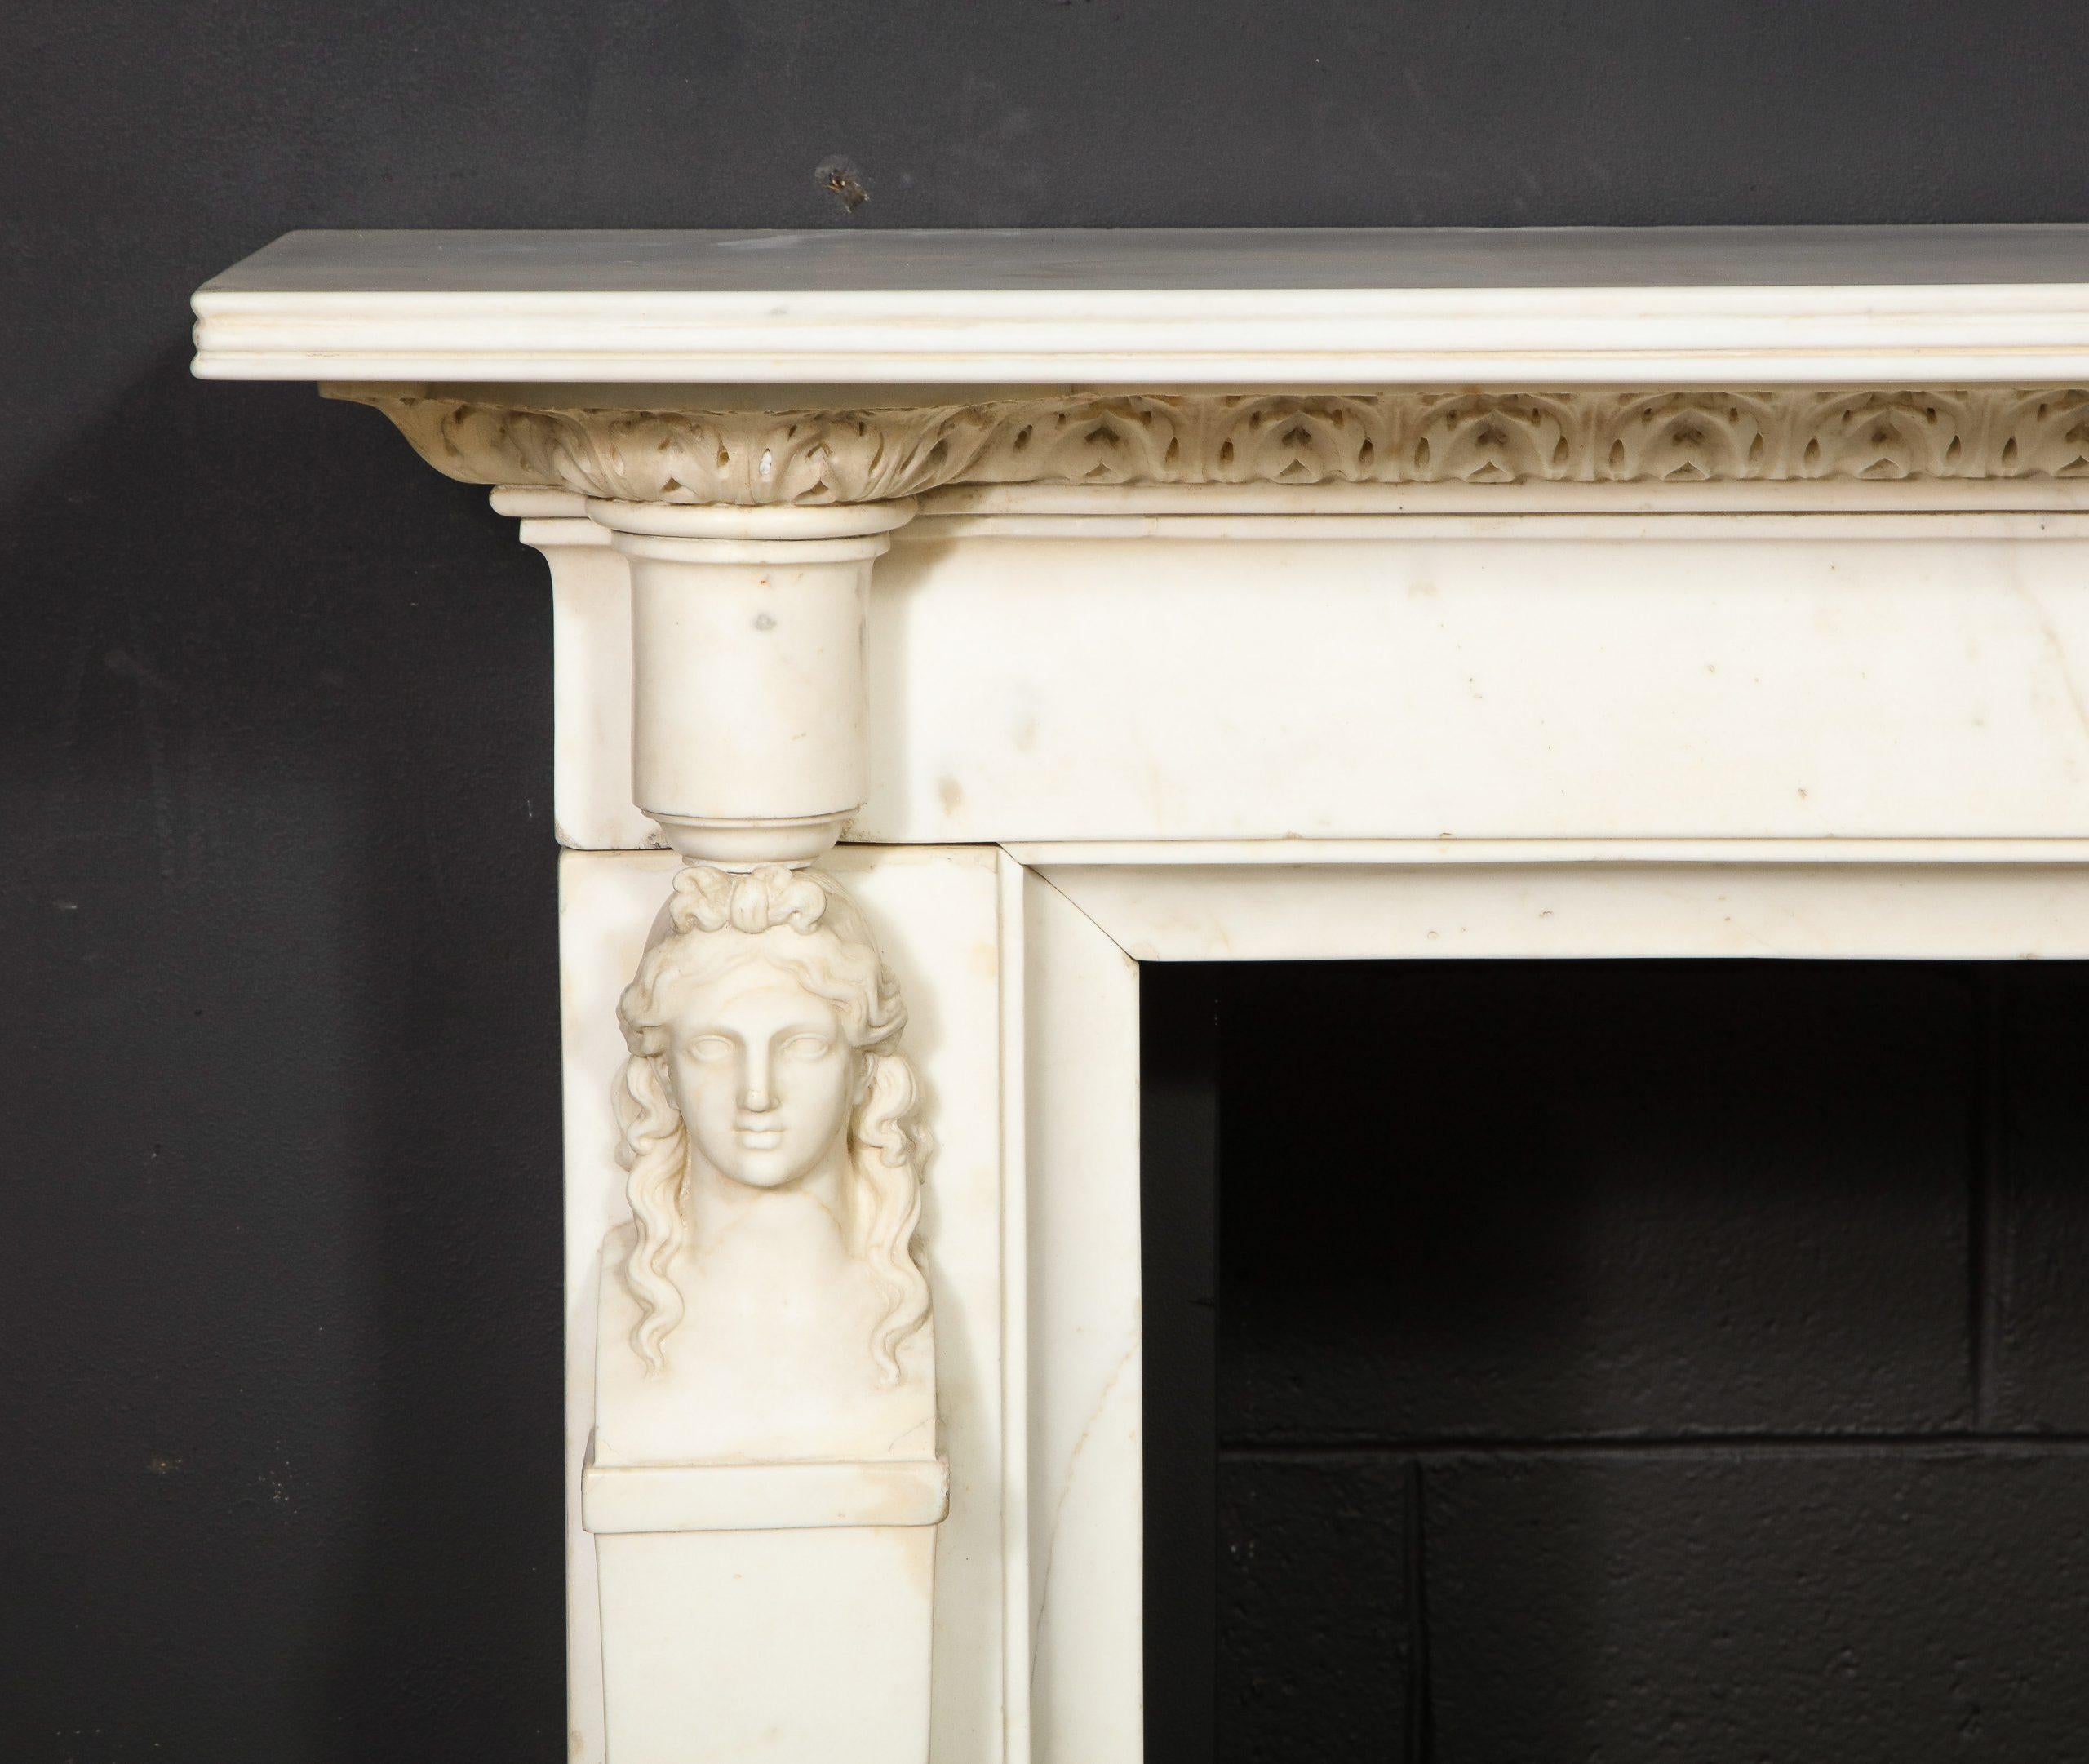 A beautiful English Regency Mantel, carved in statuary marble with two female caryatid figures that support the reeded shelf and frieze which is carved with bold acanthus leaf relief. 
Overall Dimensions of the Mantel: 67